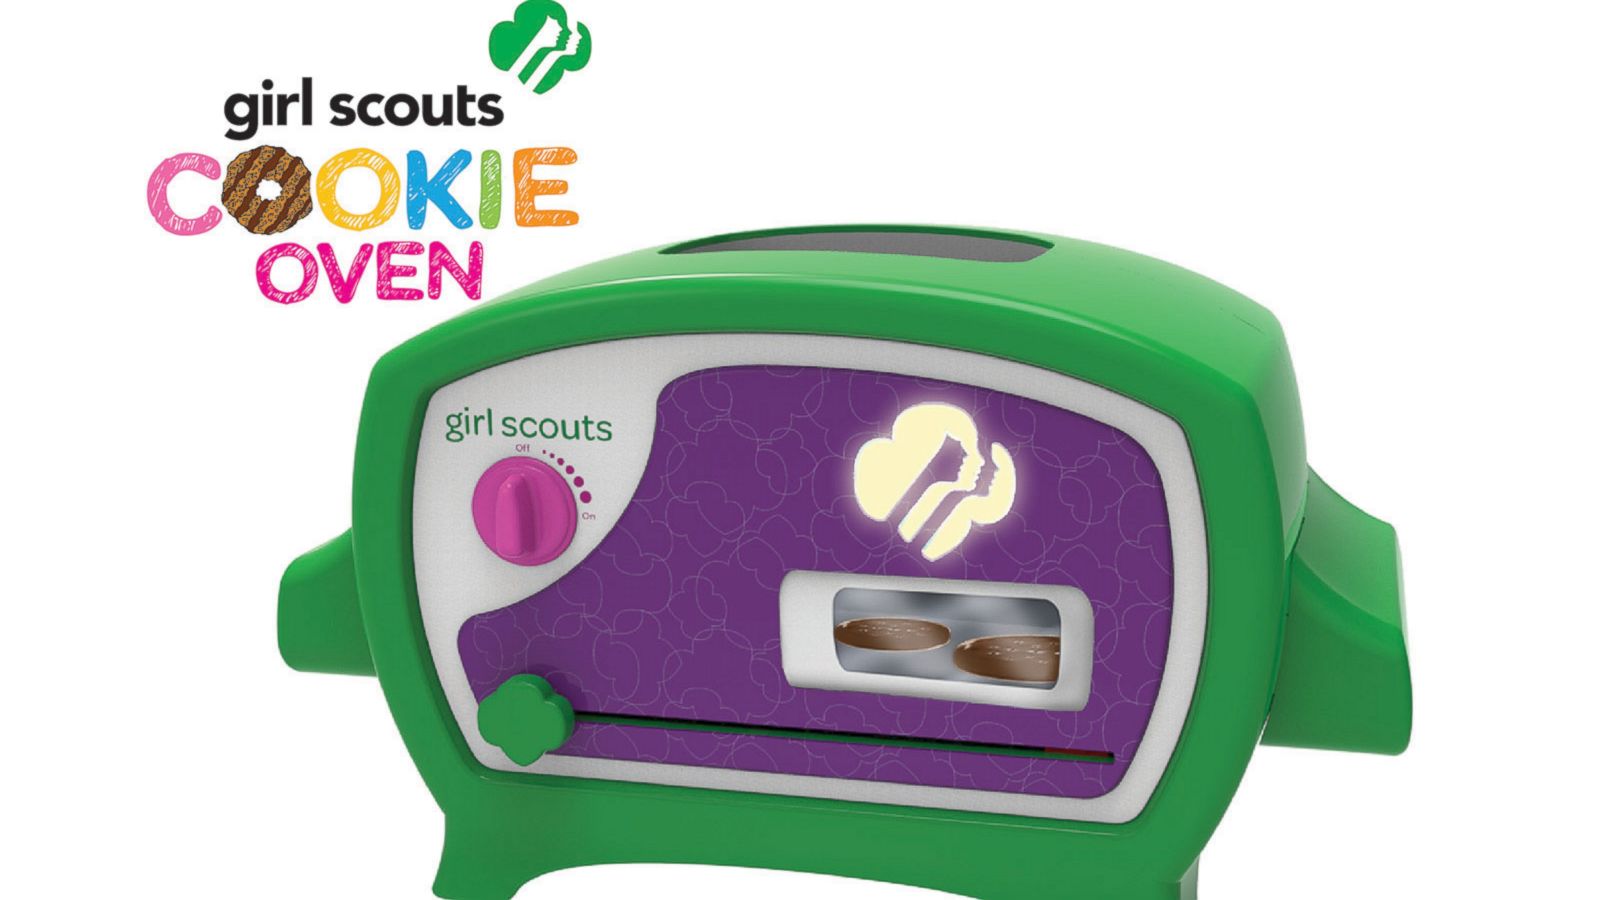 GIRL SCOUT COOKIE Easy Bake Oven Accessories - 2 REPLACEMENT PANS $10.99 -  PicClick